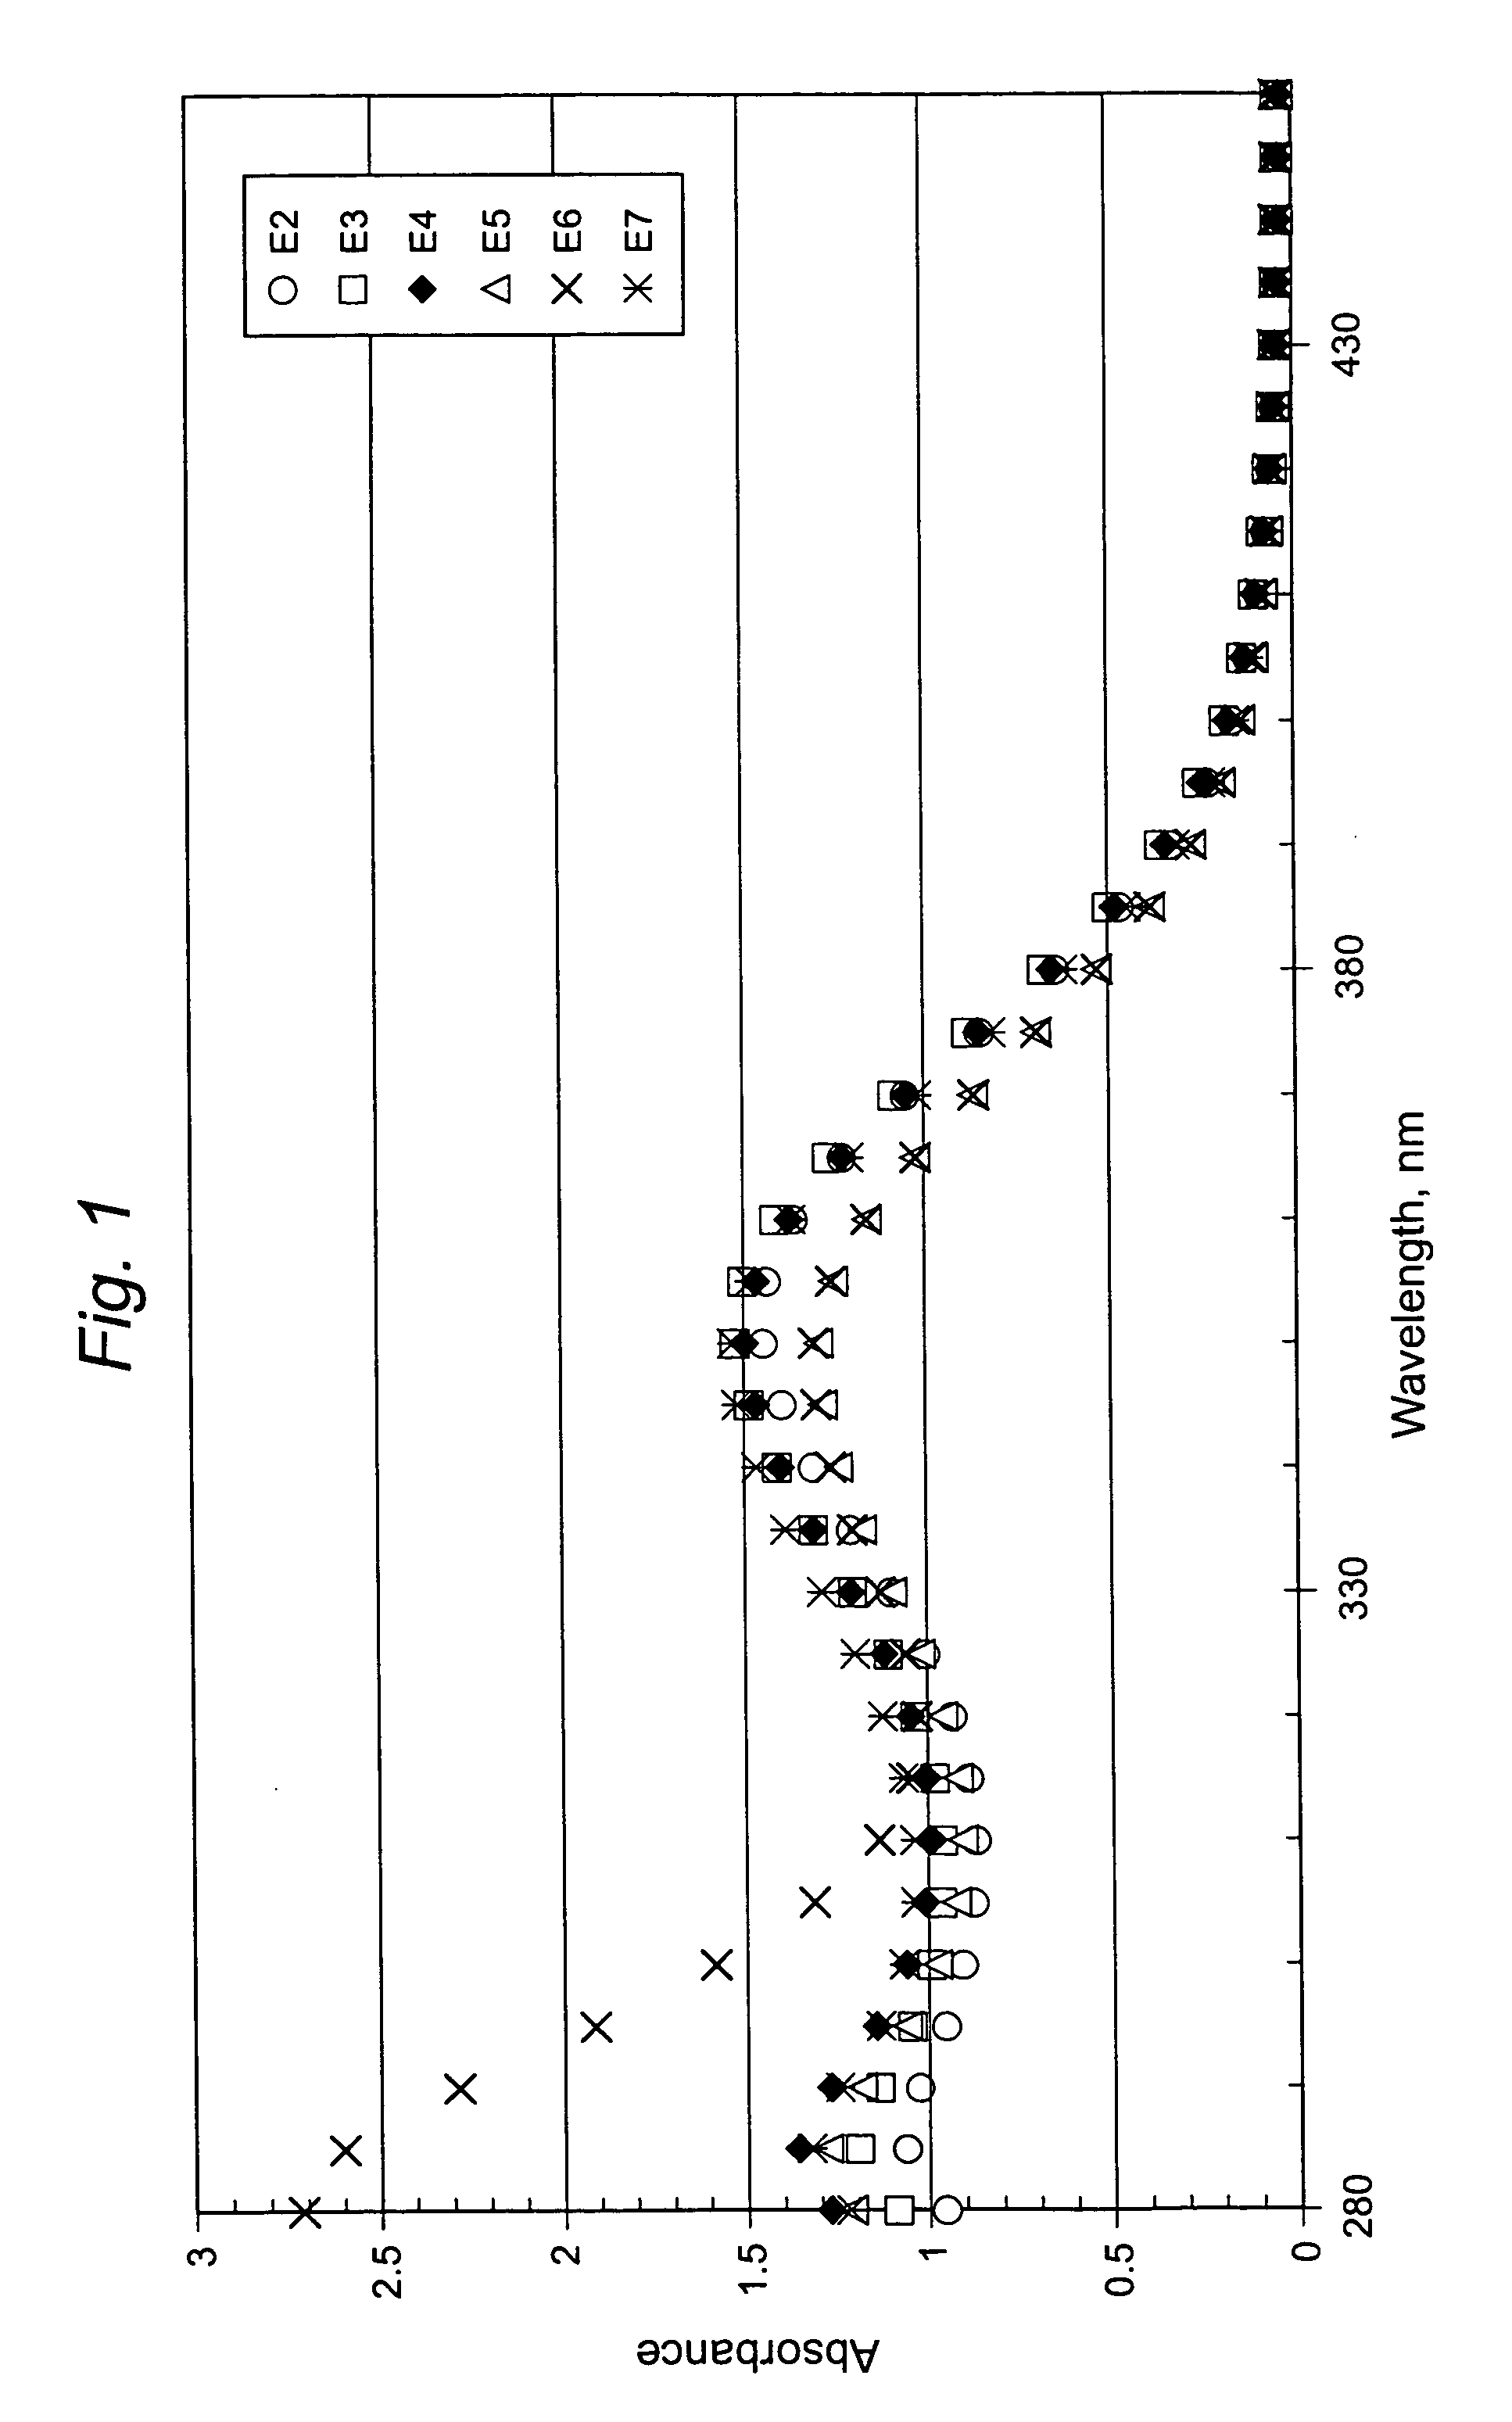 UV-absorbing coatings and methods of making the same